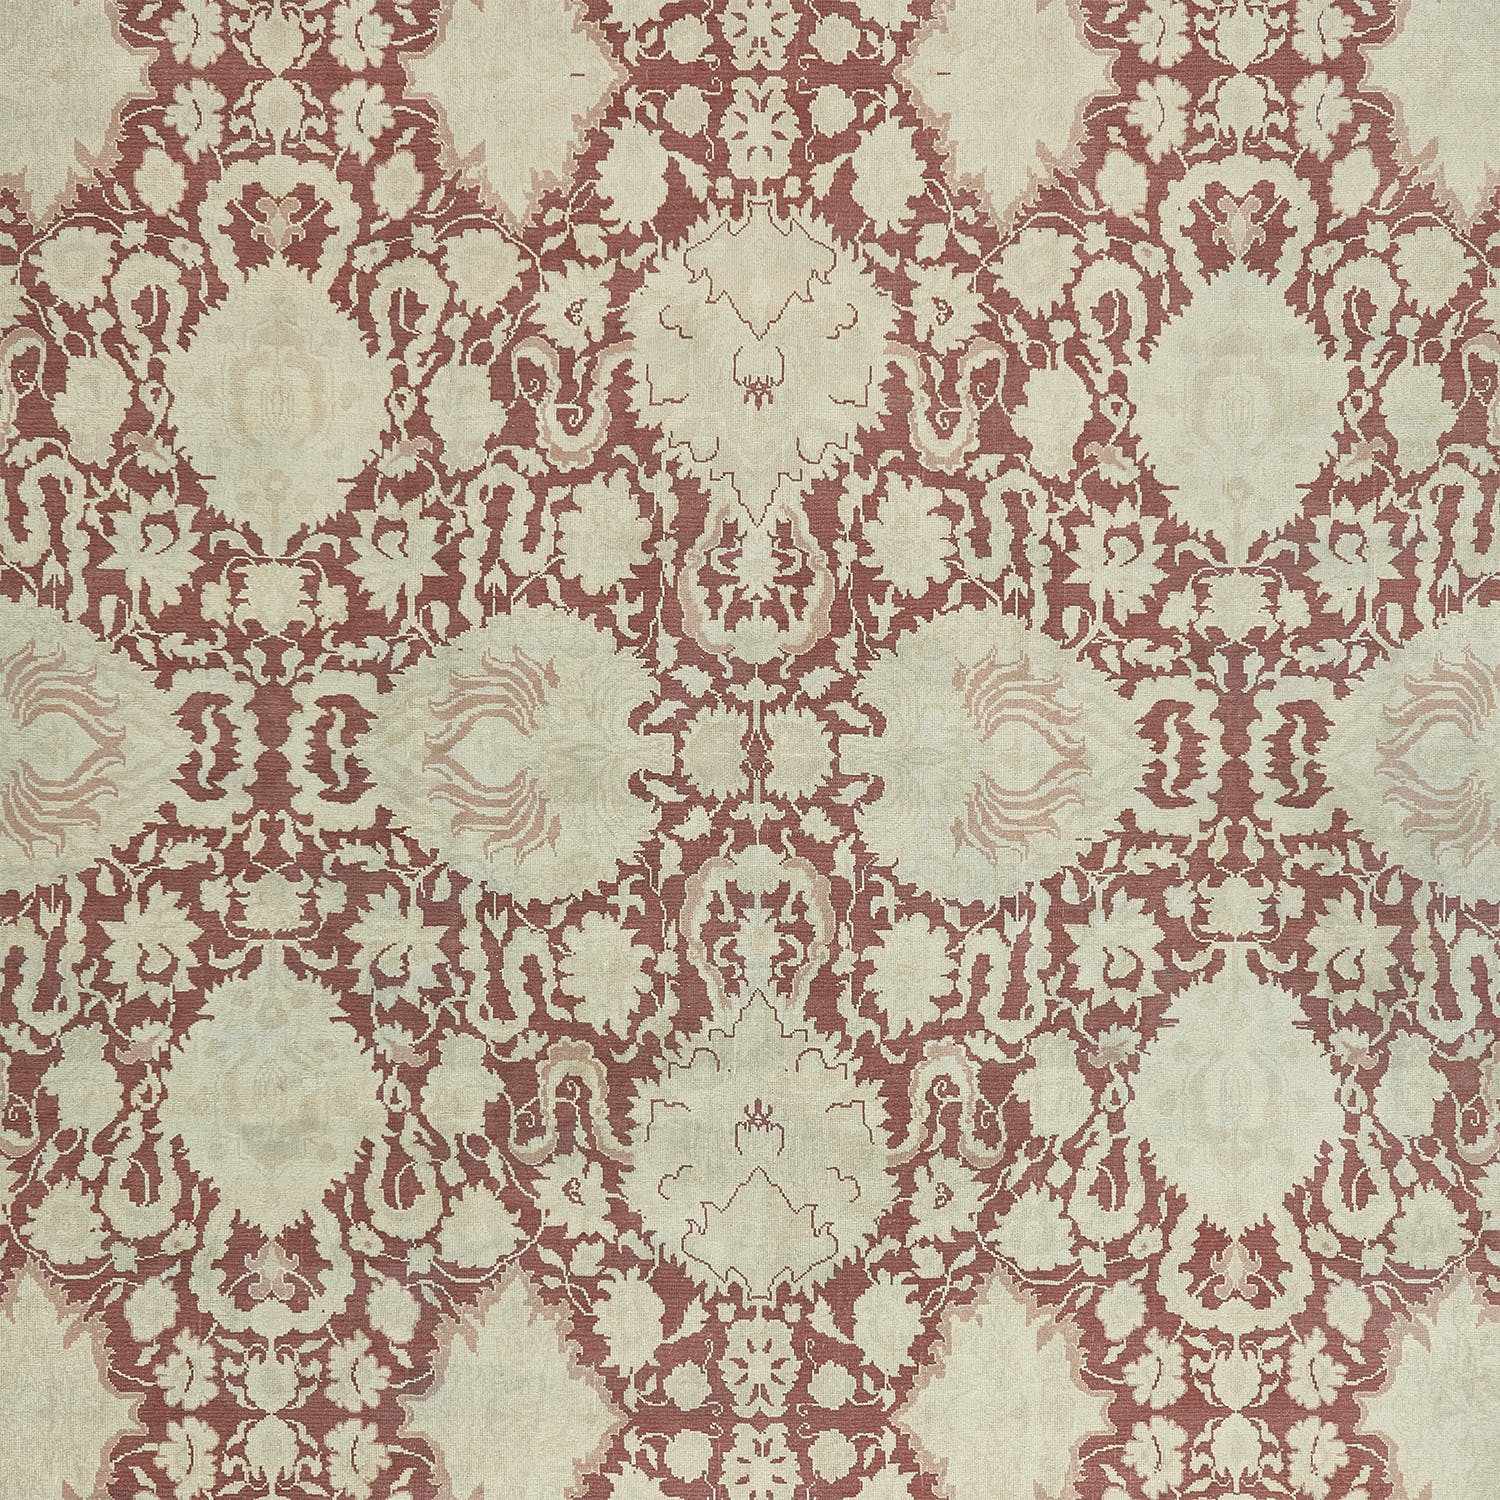 Exquisite traditional textile with floral motifs, suitable for elegant settings.